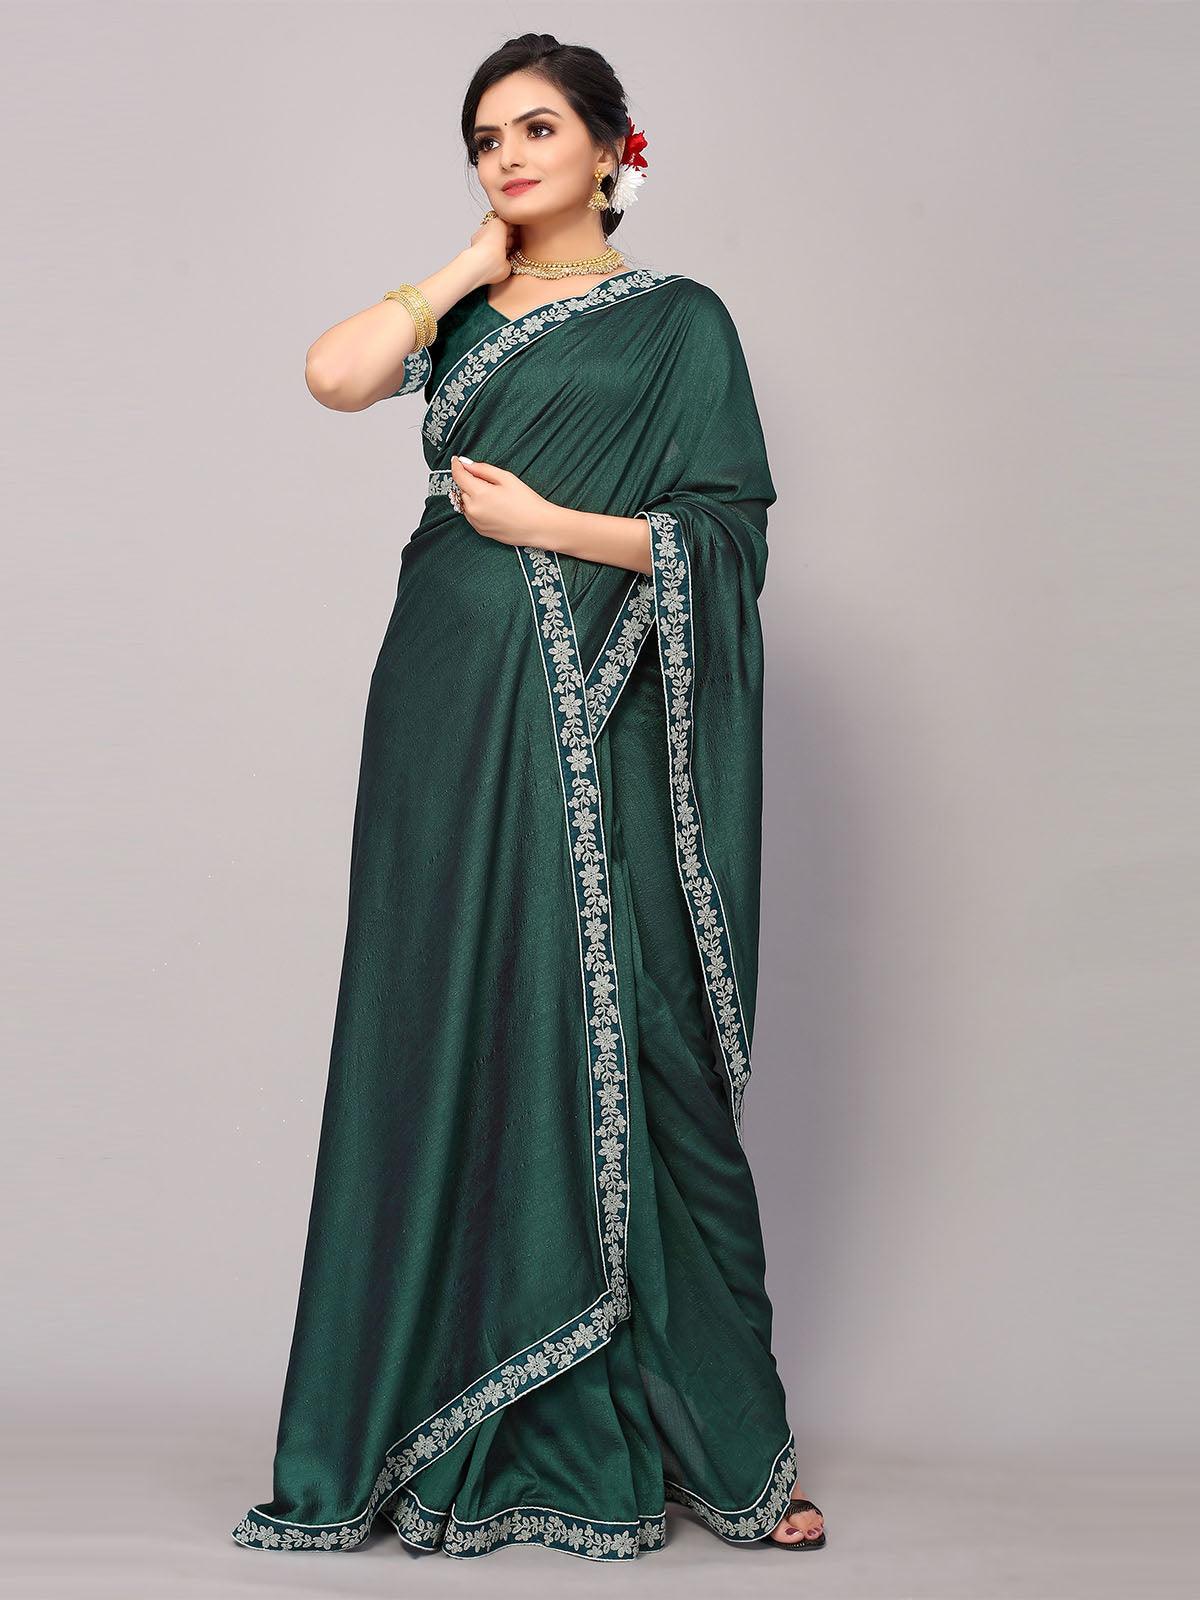 Women's Green Poly Silk Embroidery Border Work Saree With Blouse - Odette